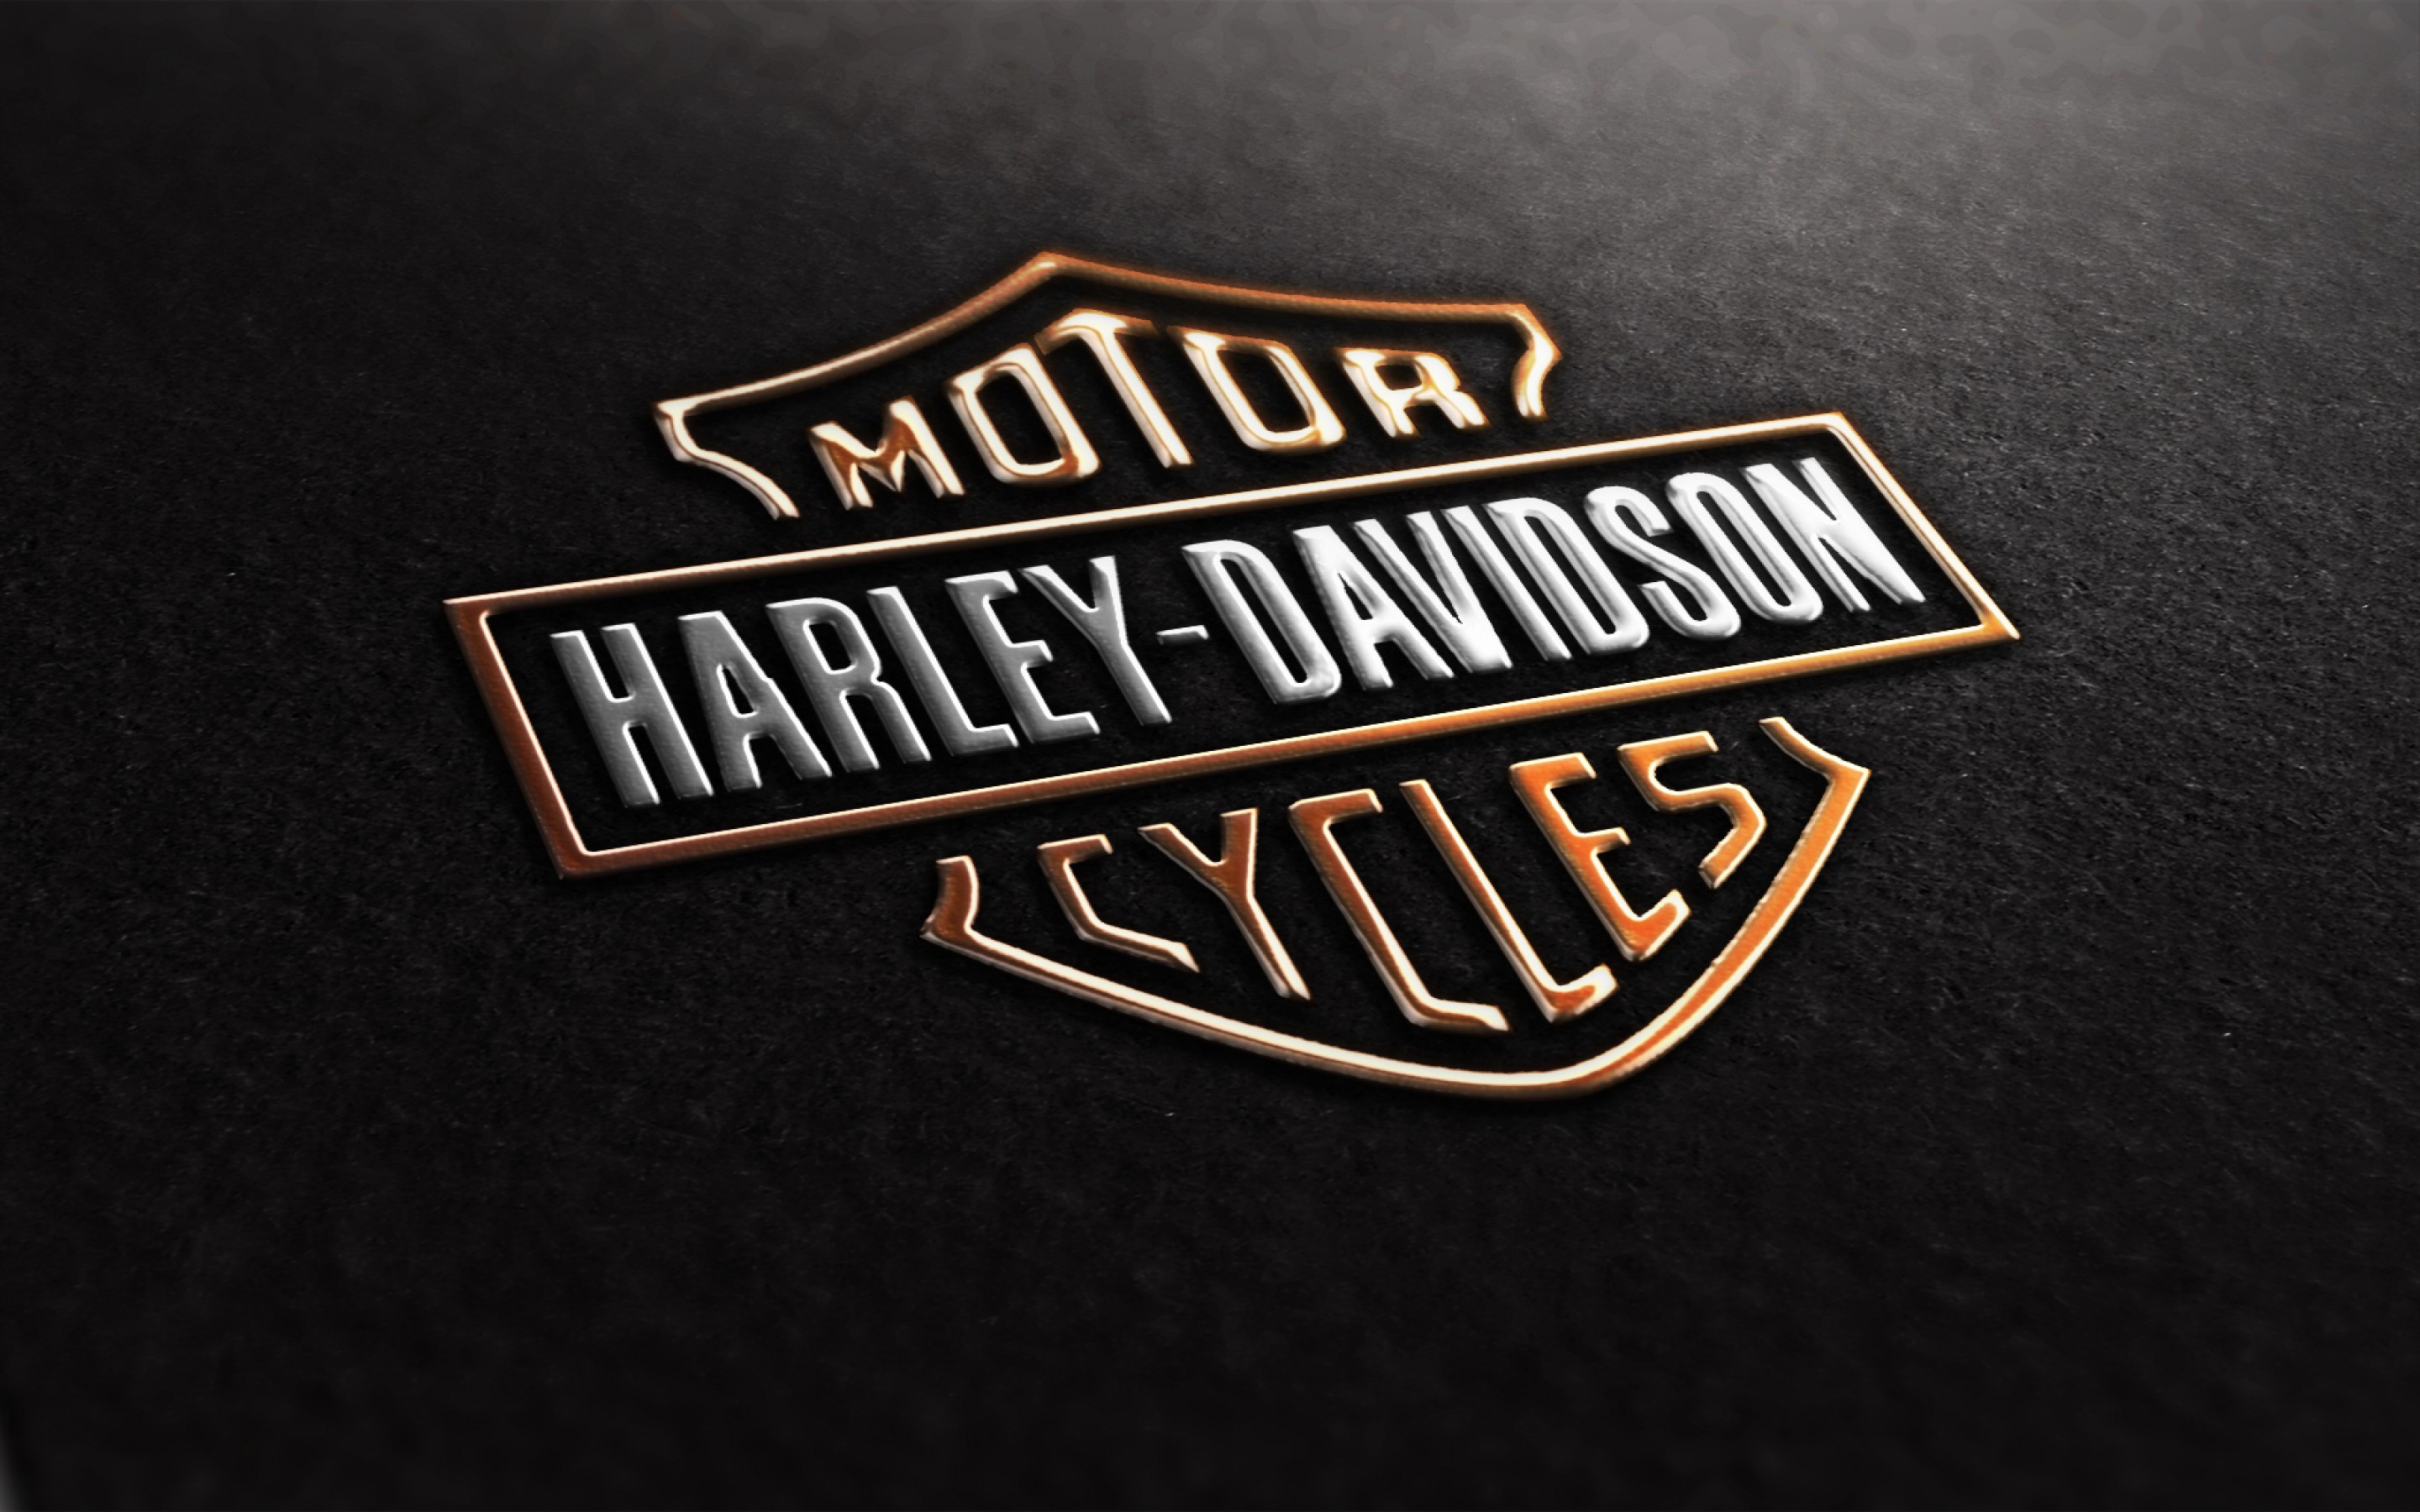 Harley Davidson Logo Motorcycle Wallpaper Widescreen With